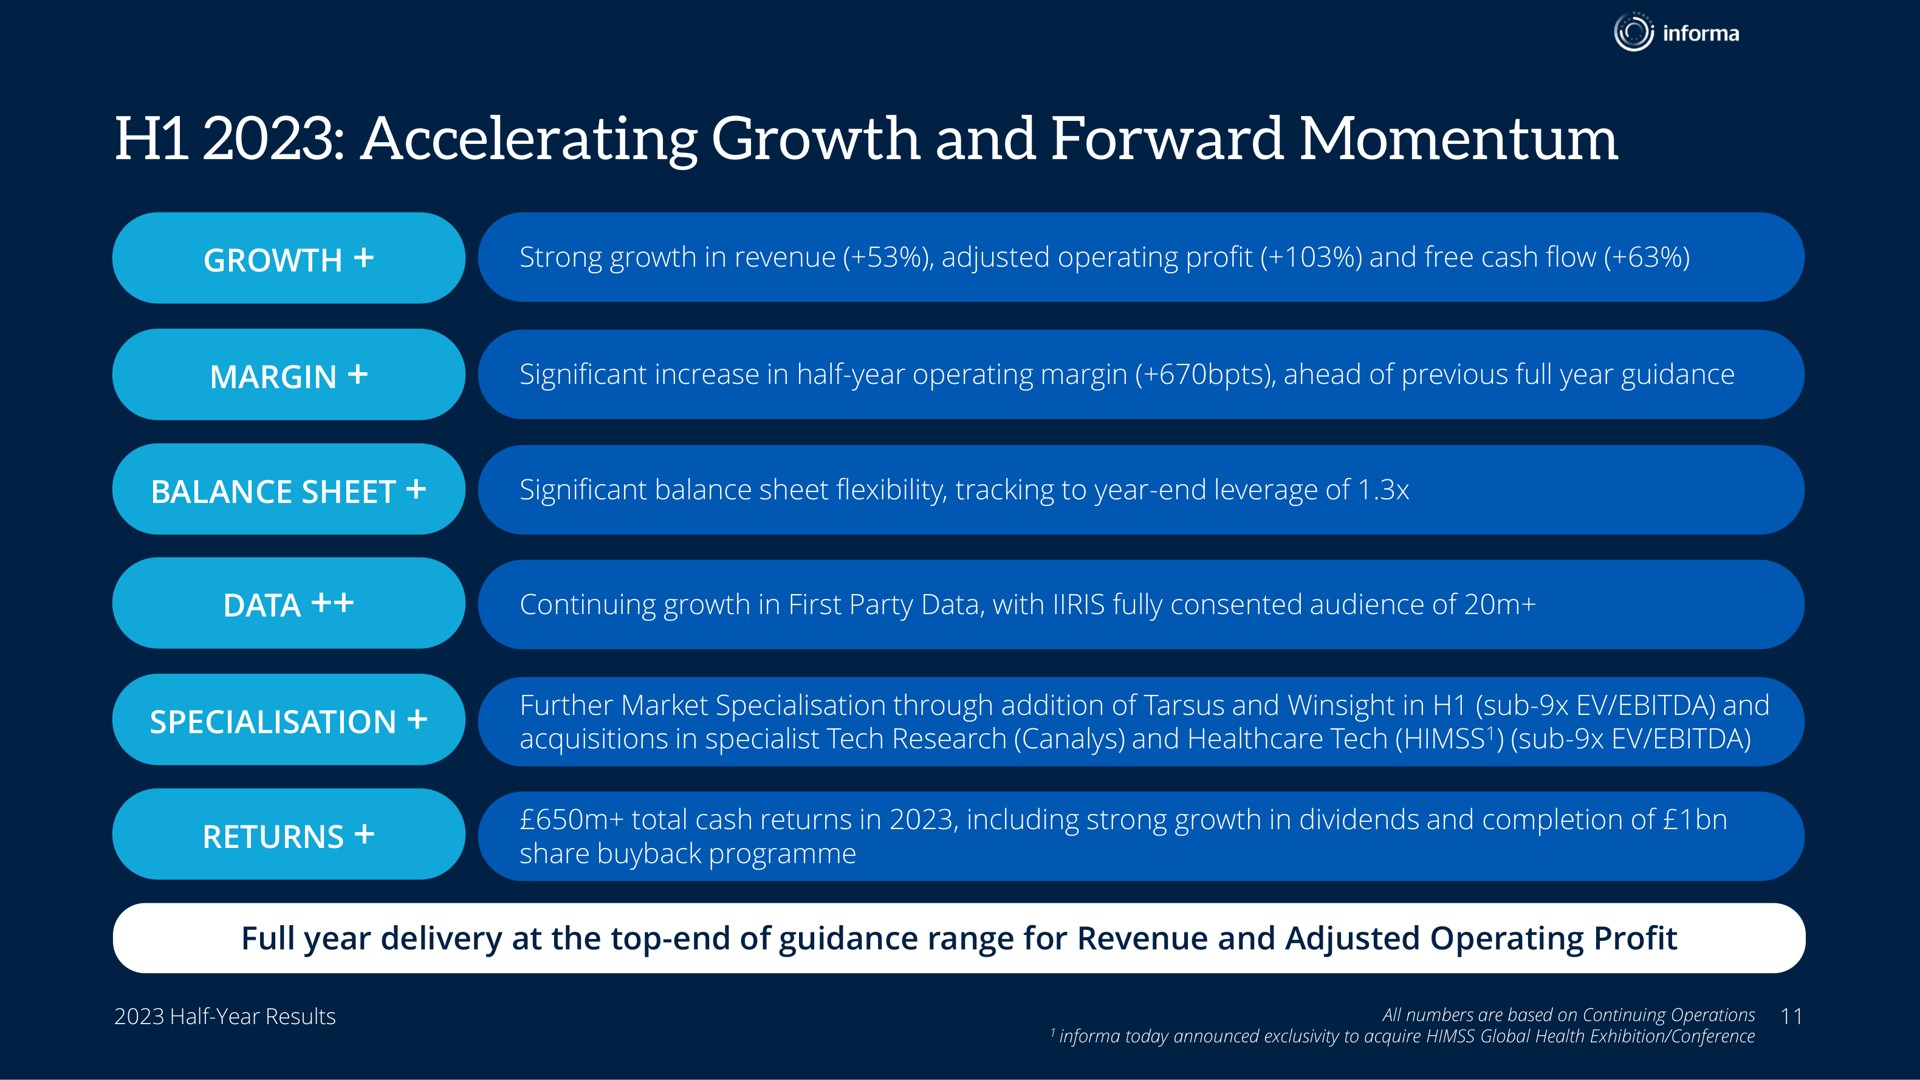 accelerating growth and forward momentum | Informa